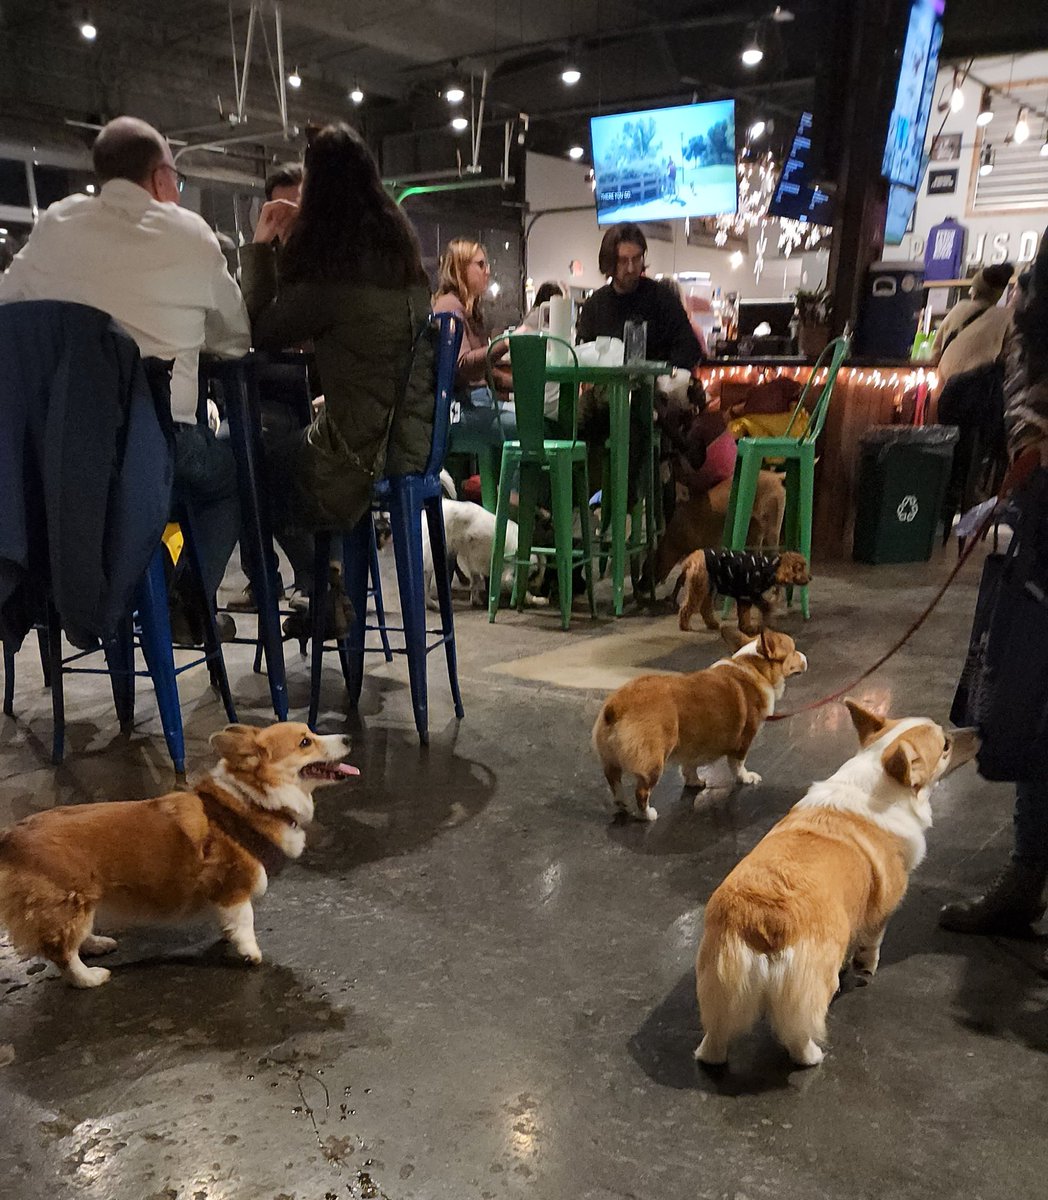 #corgi night @pgjdogbar !

Mahm had a ginger and lime tequila thing

I missed the group shot bc I needed to go run around in the freezing night

Fun times allaround